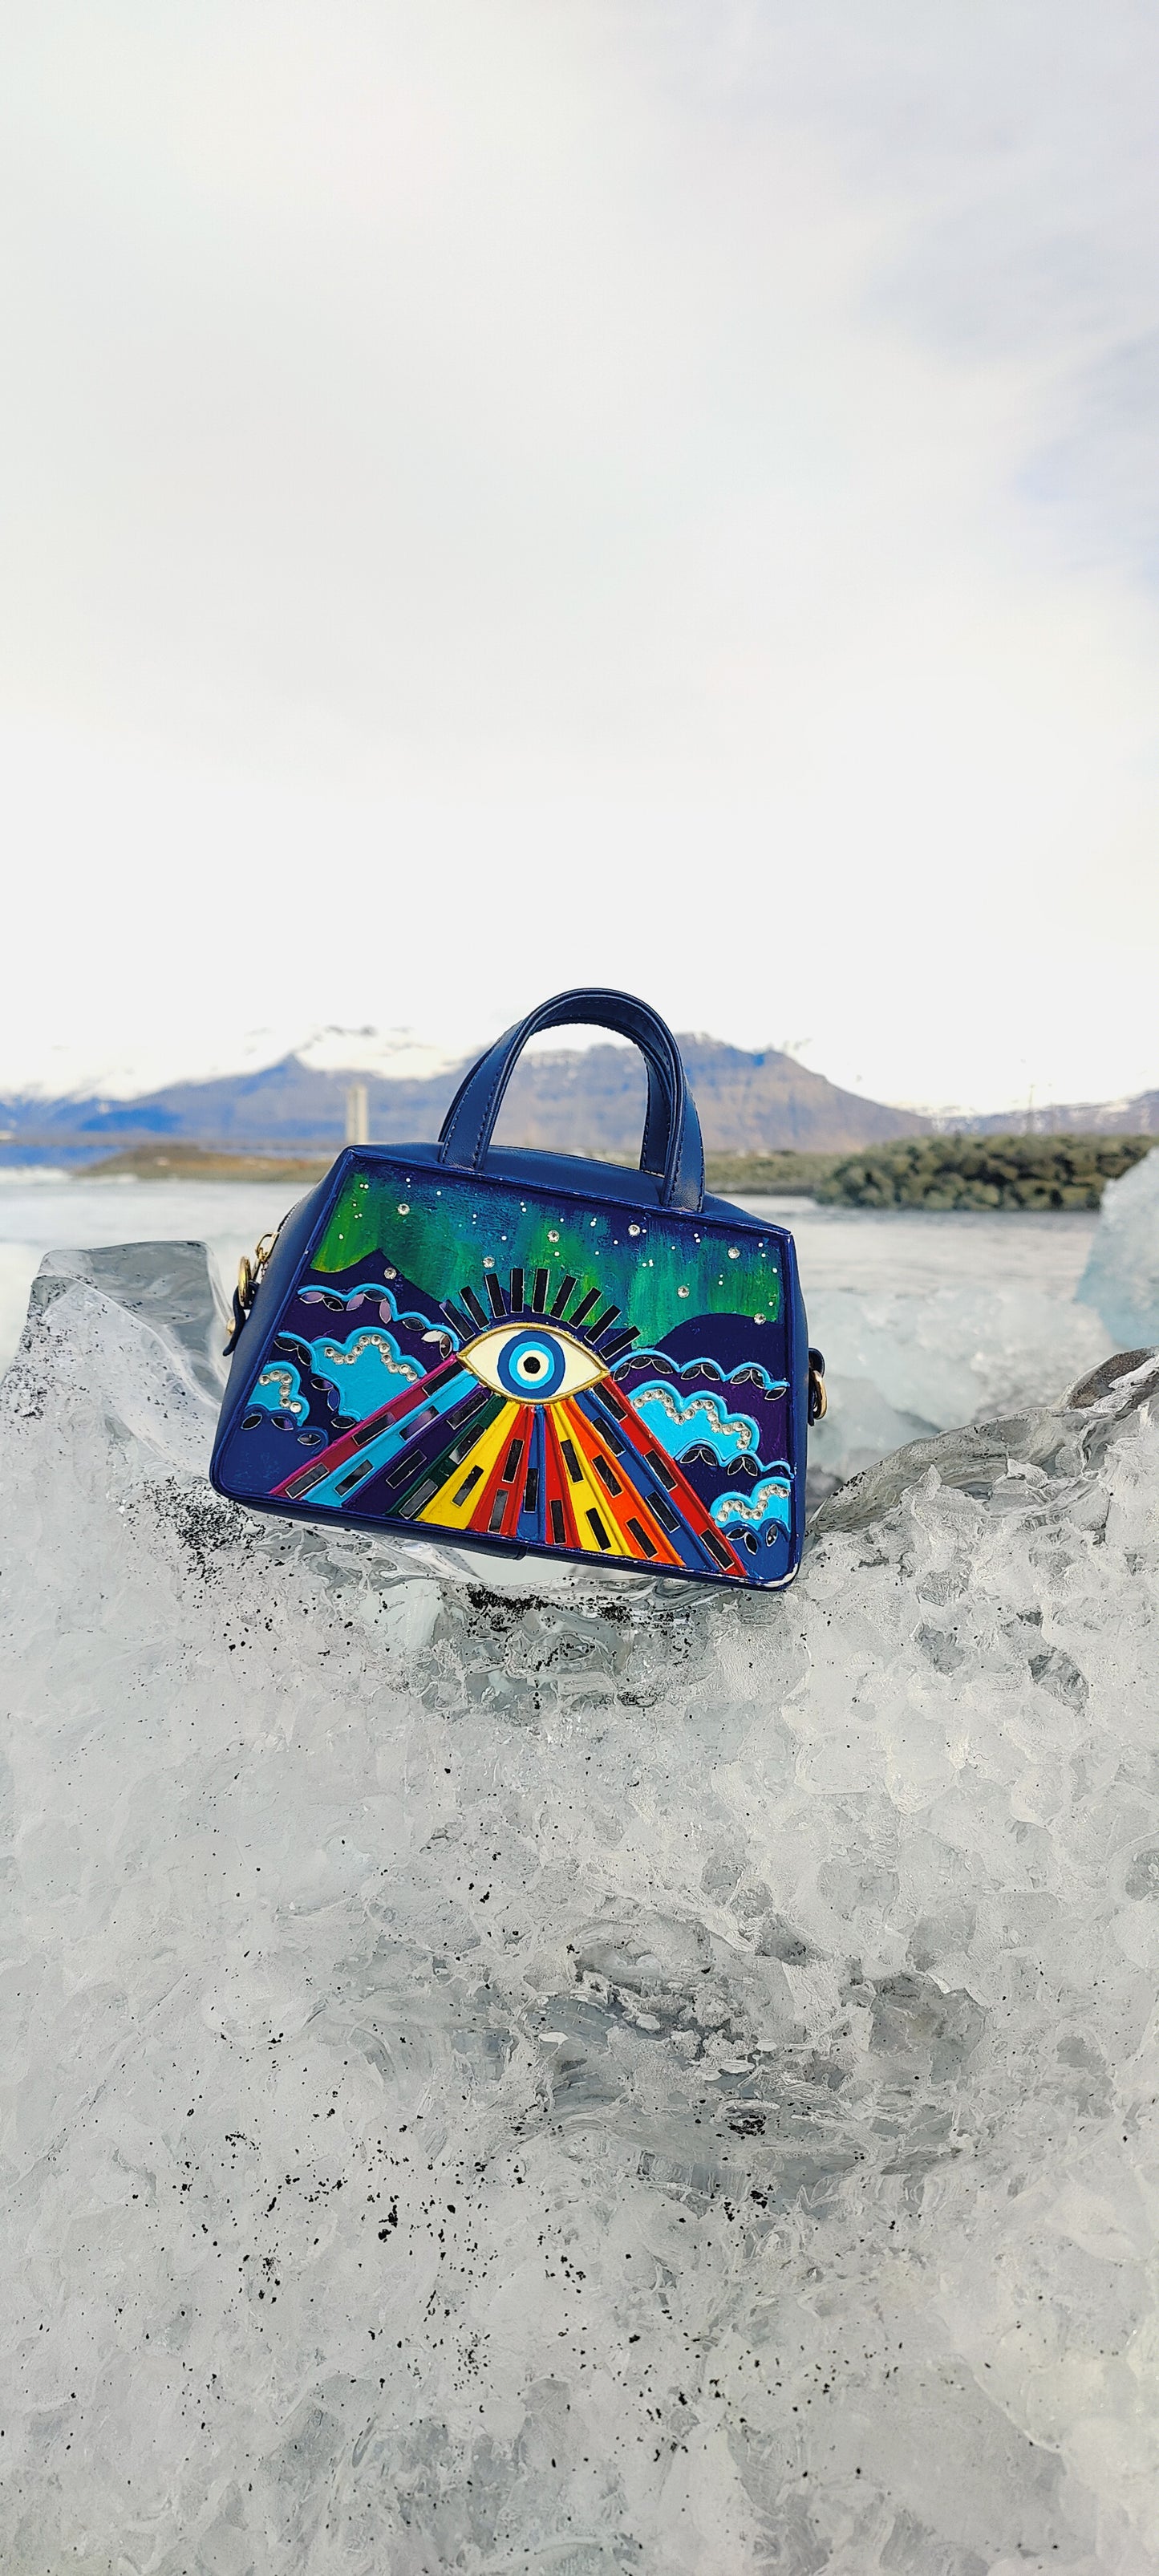 Northern Lights Lippan Art Unusual shaped Bag with Zipper and Sling